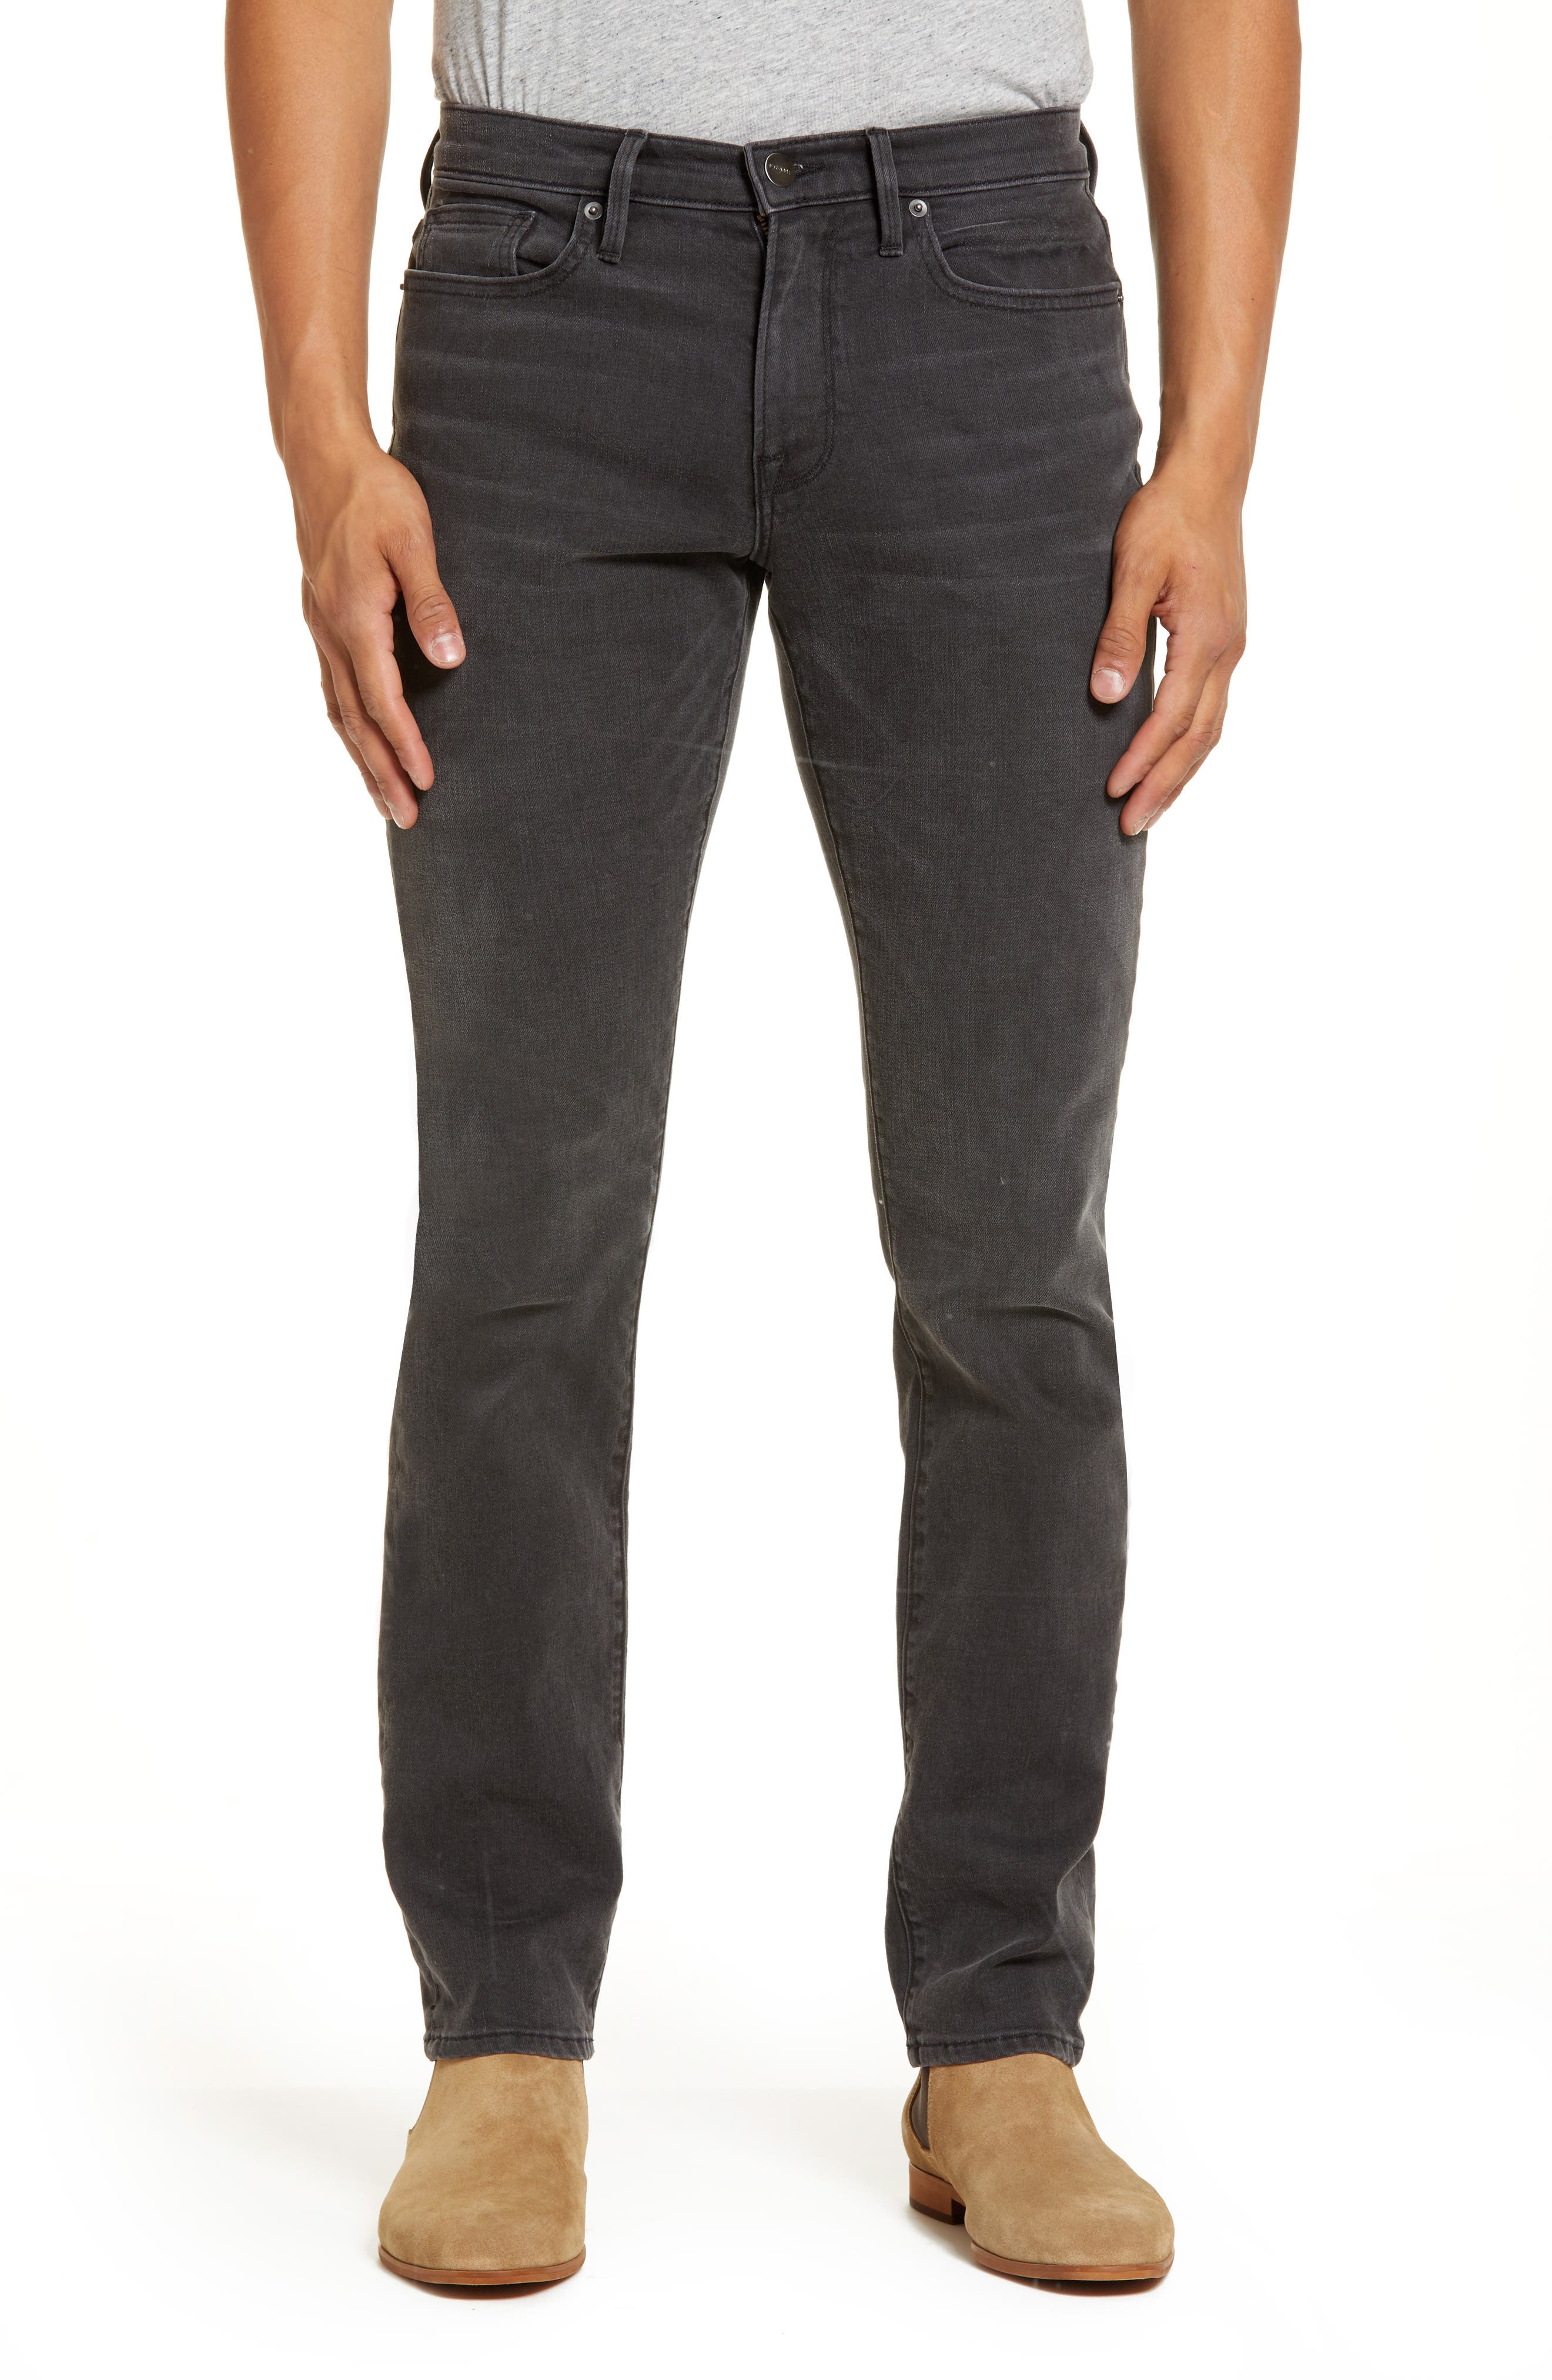 flare jeans with front seam